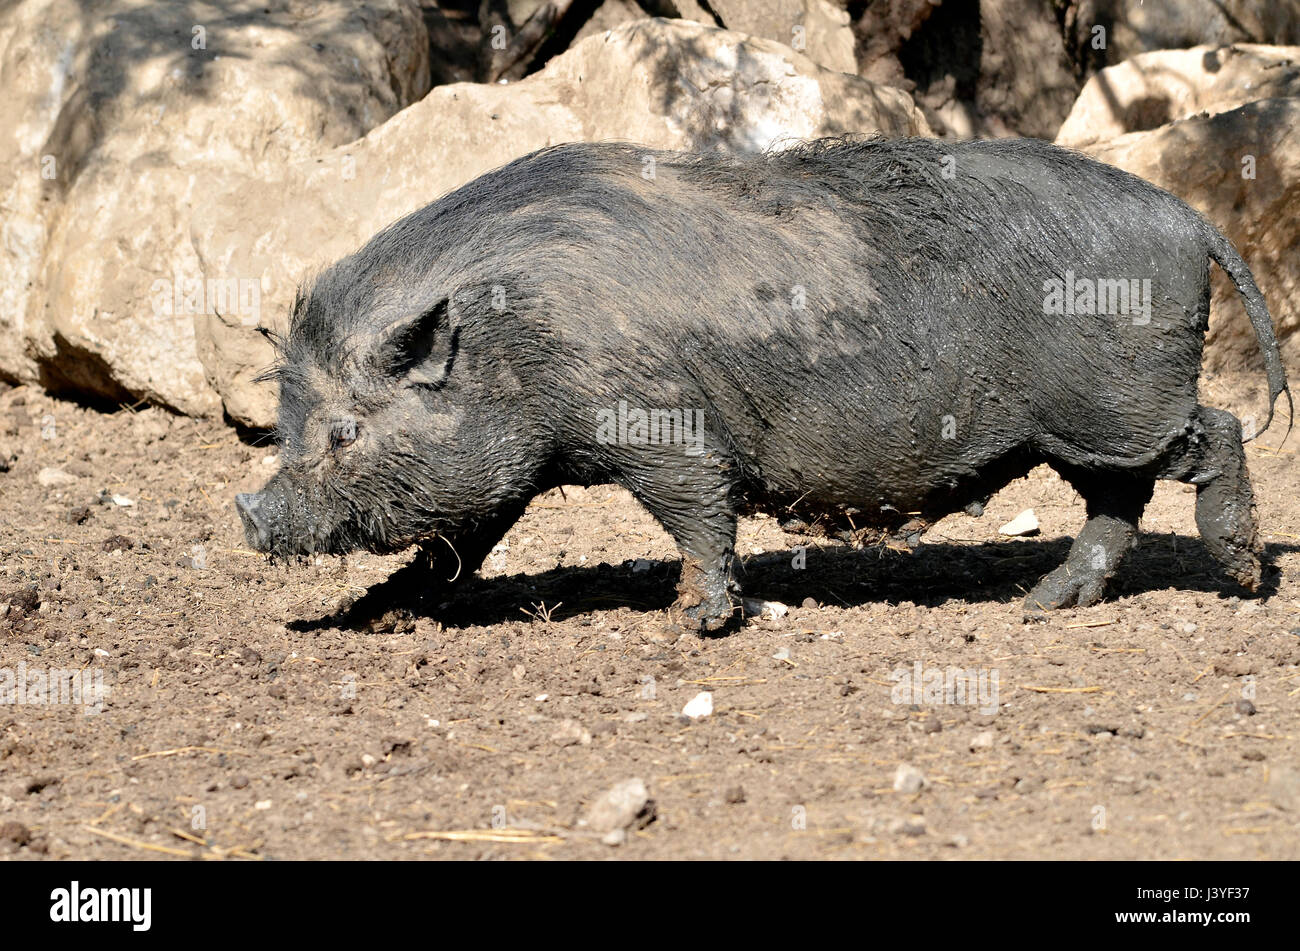 Closeup female Vietnamese potbellied pig (Sus scrofa domesticus) walking on ground and viewed of profile Stock Photo